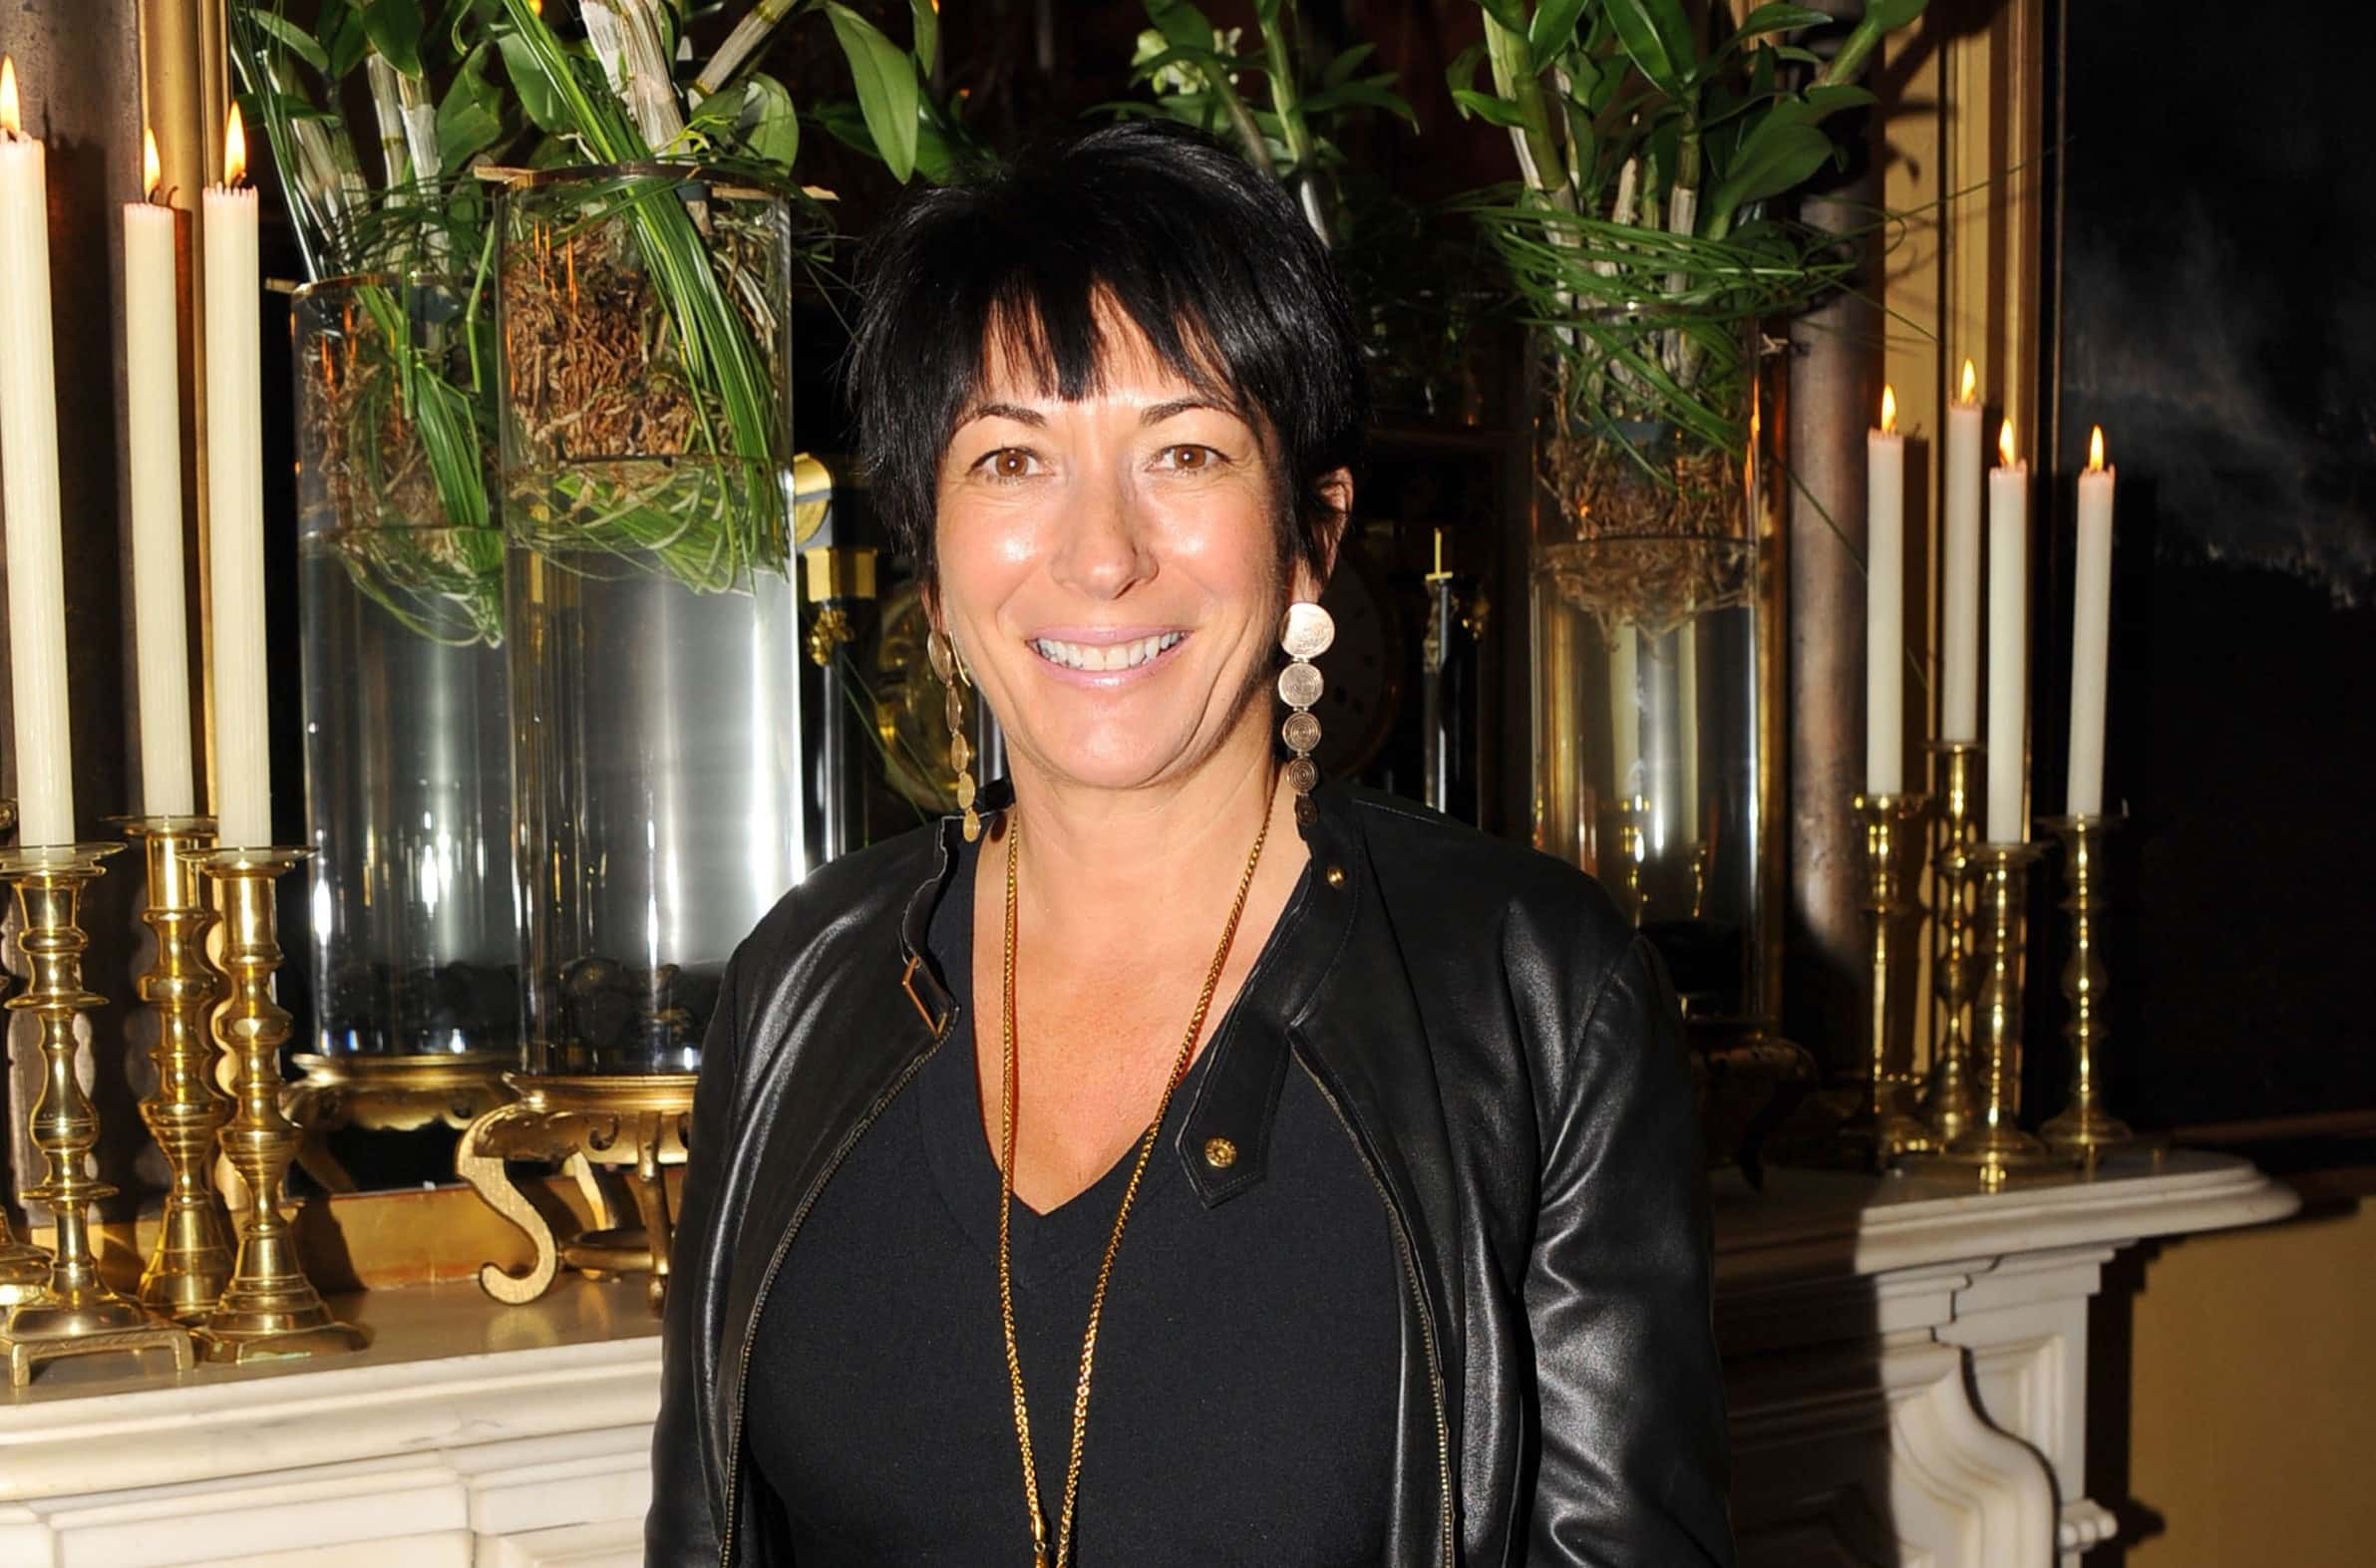 Mystery of Ghislaine Maxwell's Wealth Hangs Over Case | Time